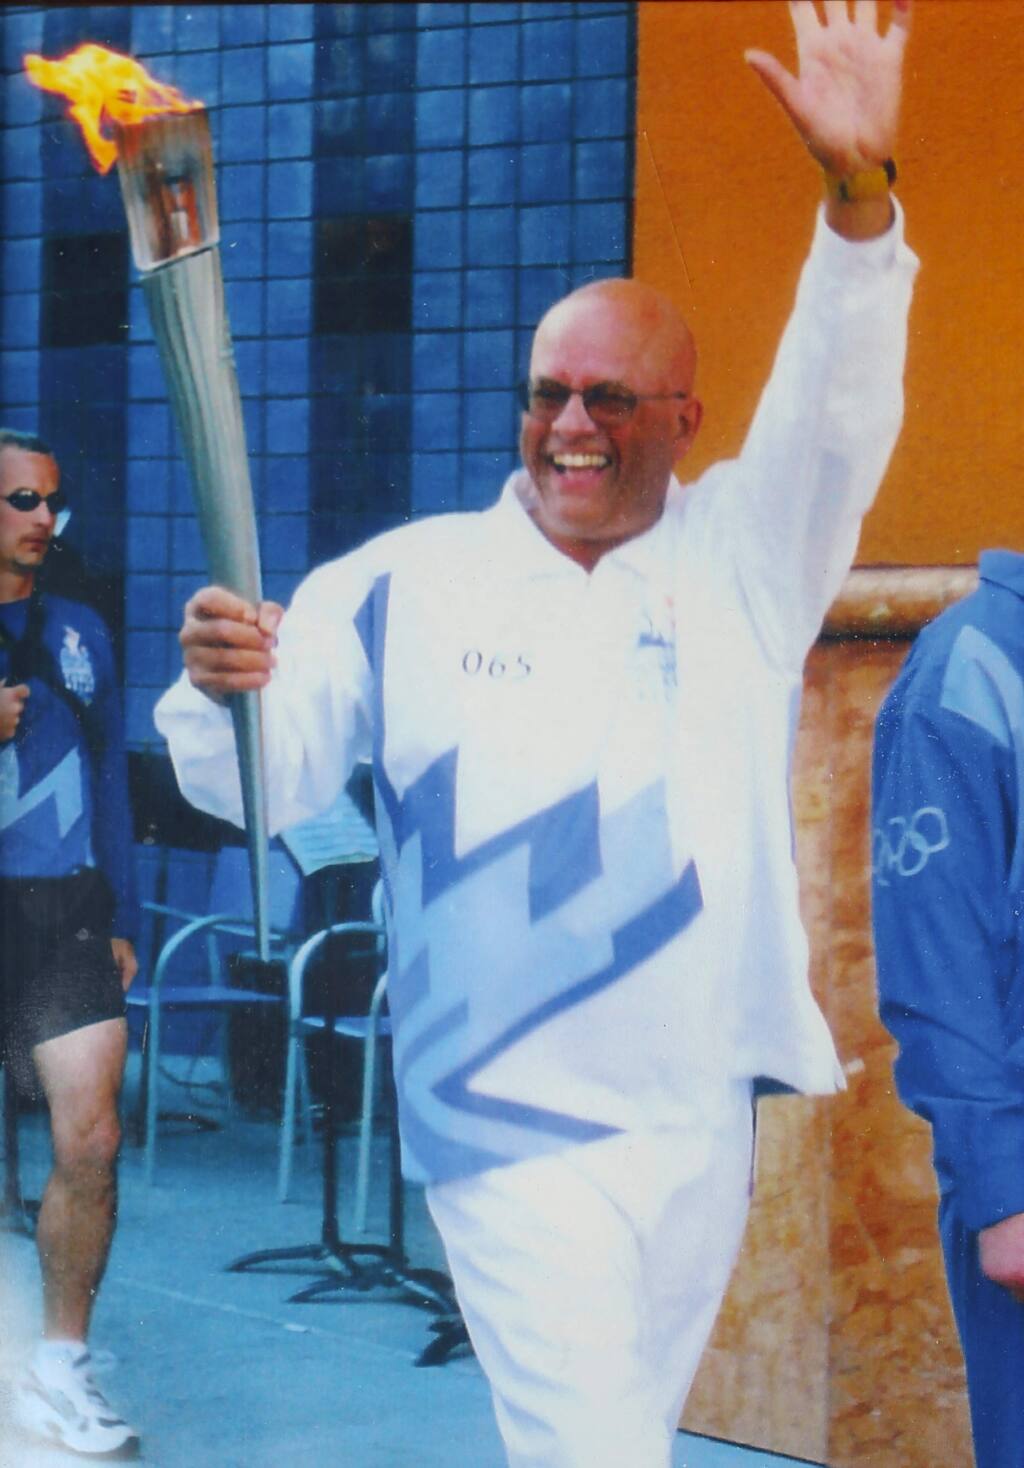 Tom Francois carrying the Olympic torch in 2002.(Photo courtesy Tom Francois)